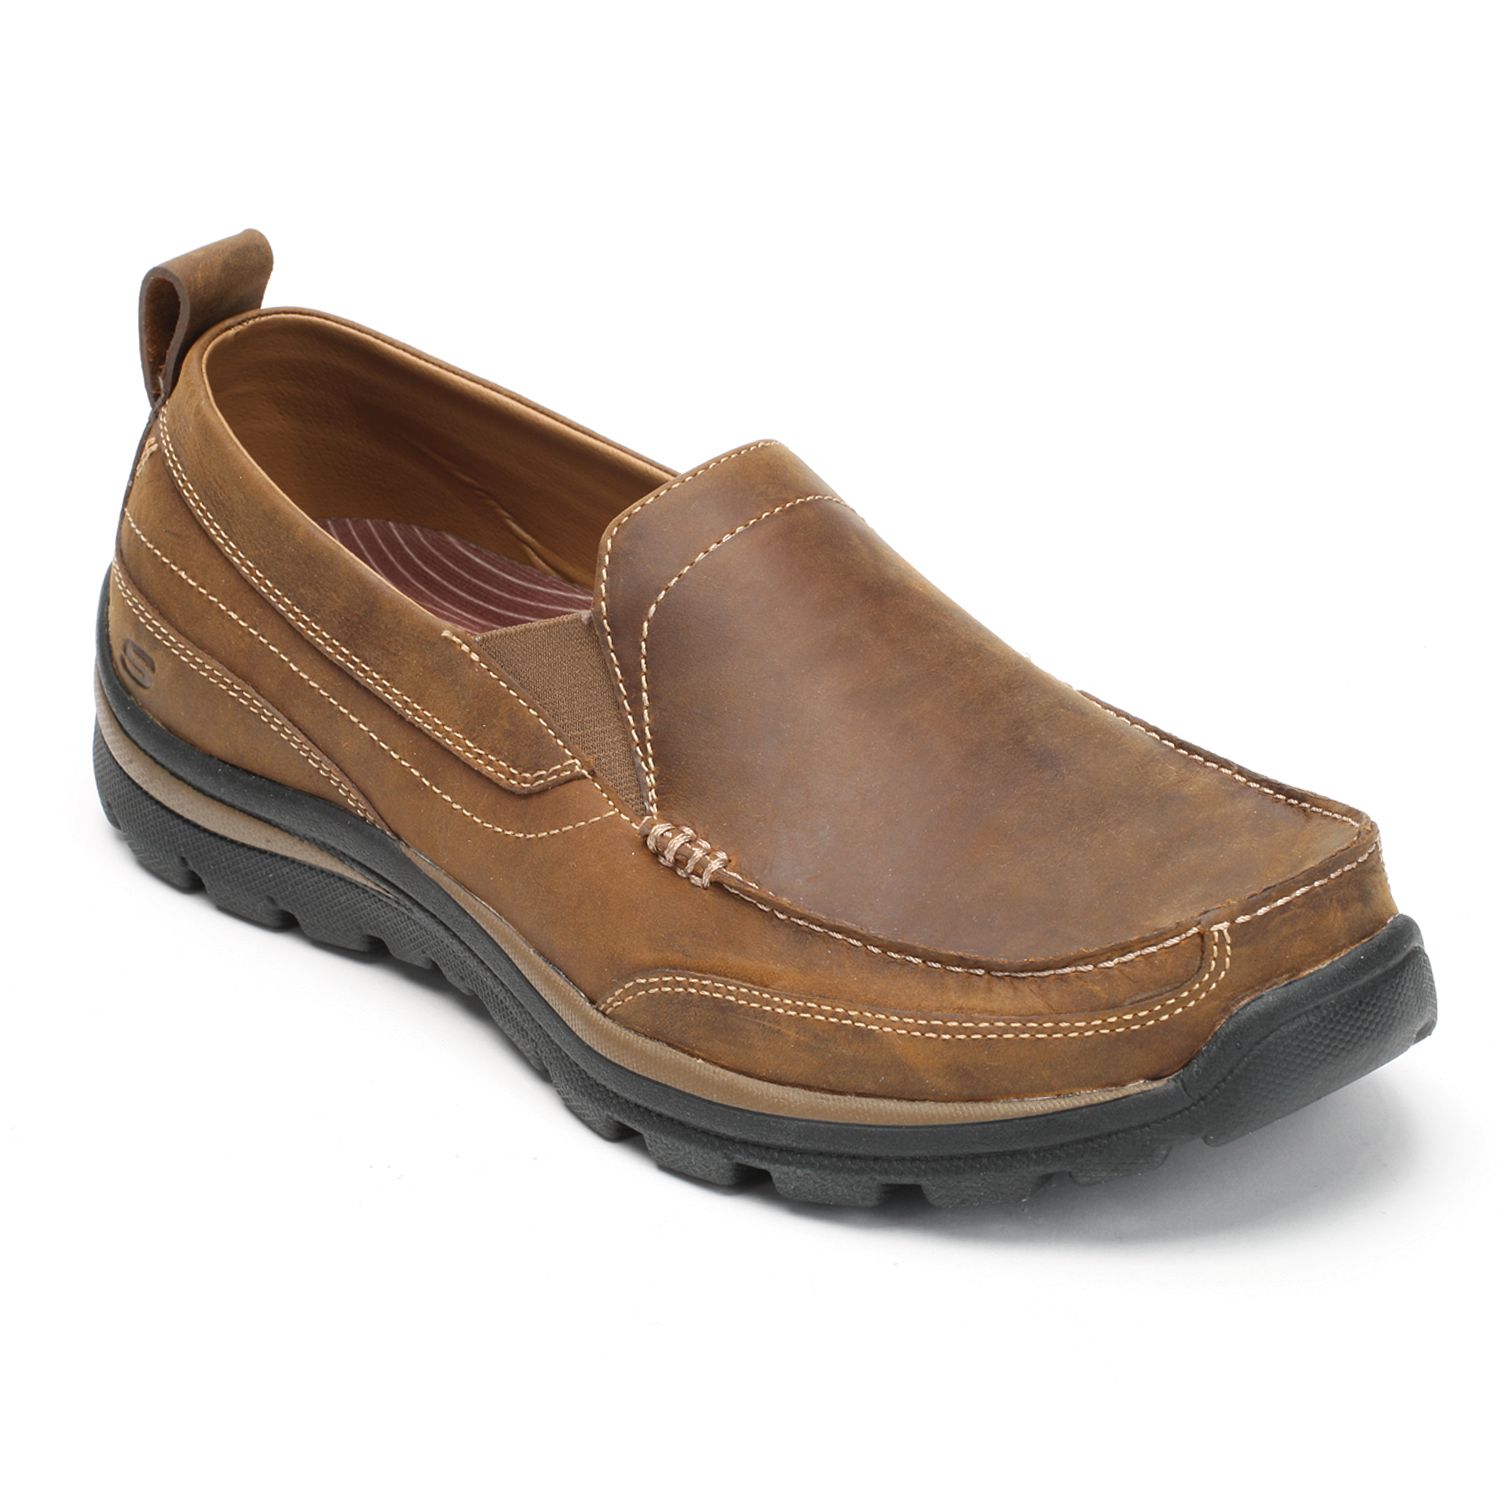 Skechers® Relaxed Fit Gains Men's Loafers